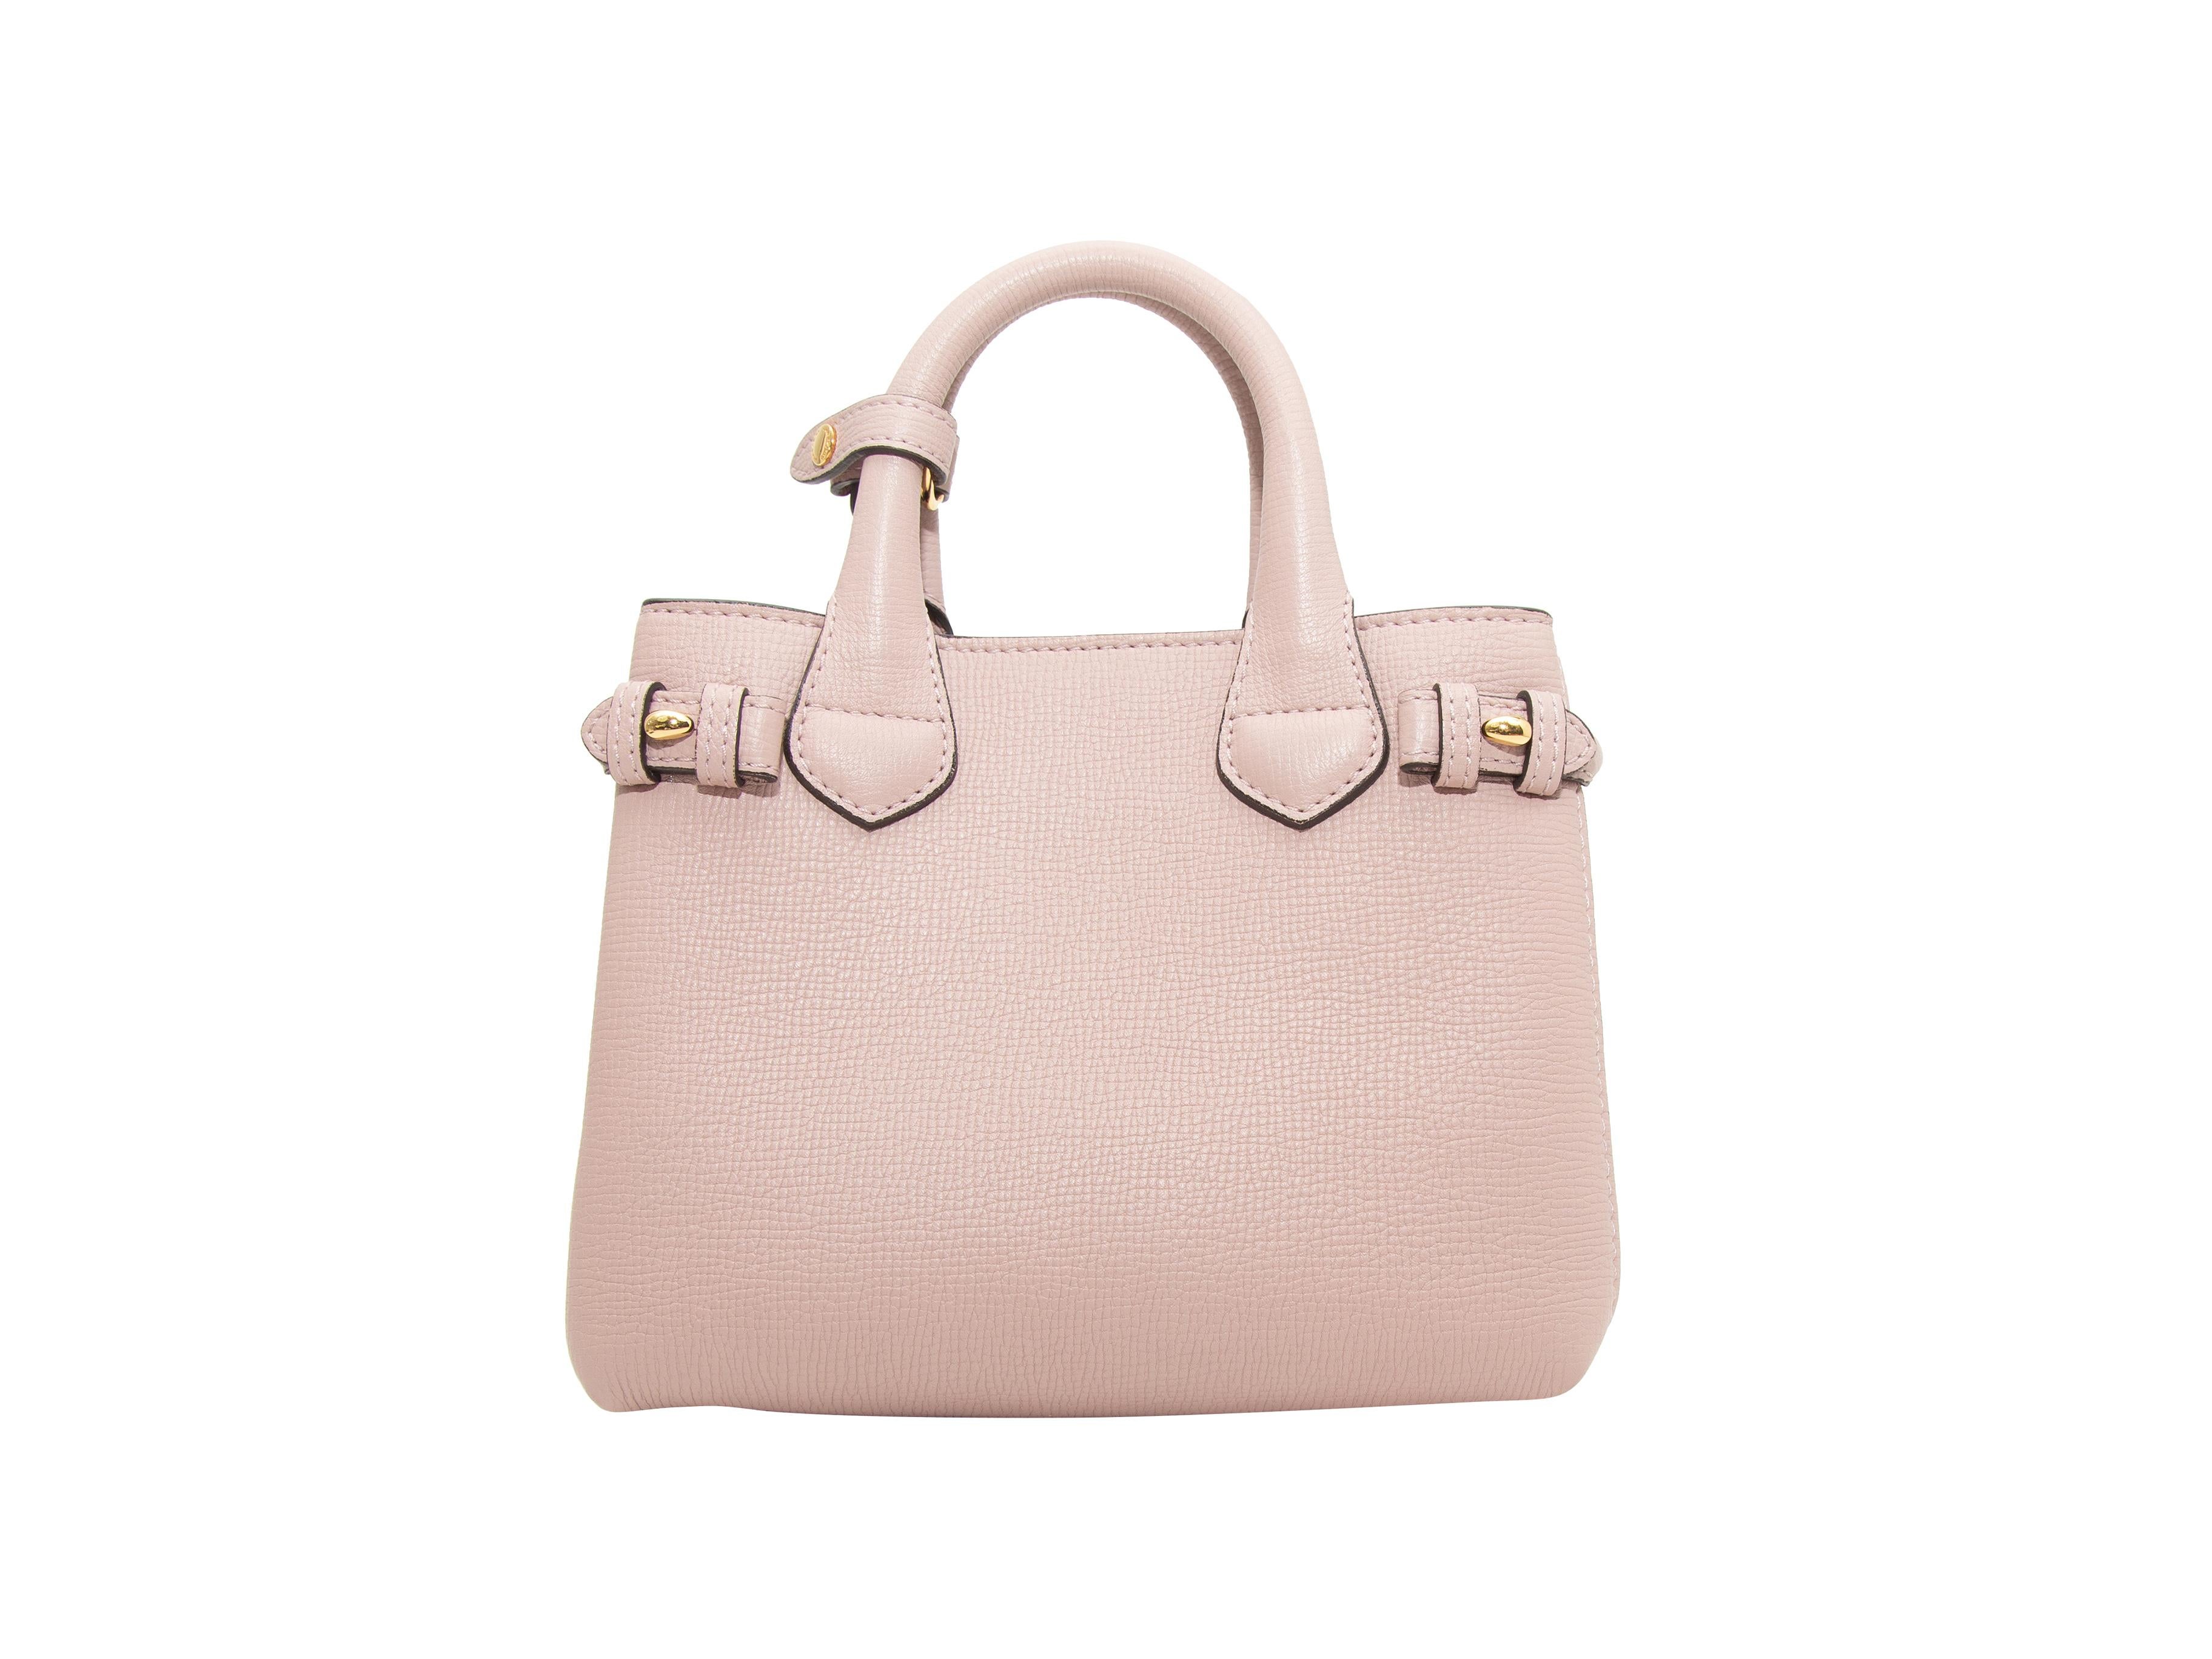 Product details: Light mauve and multicolor leather Baby Banner Tote by Burberry. Gold-tone hardware. Dual rolled top handles. Nova Check detailing at sides. Optional shoulder strap. Magnetic top closure. 8